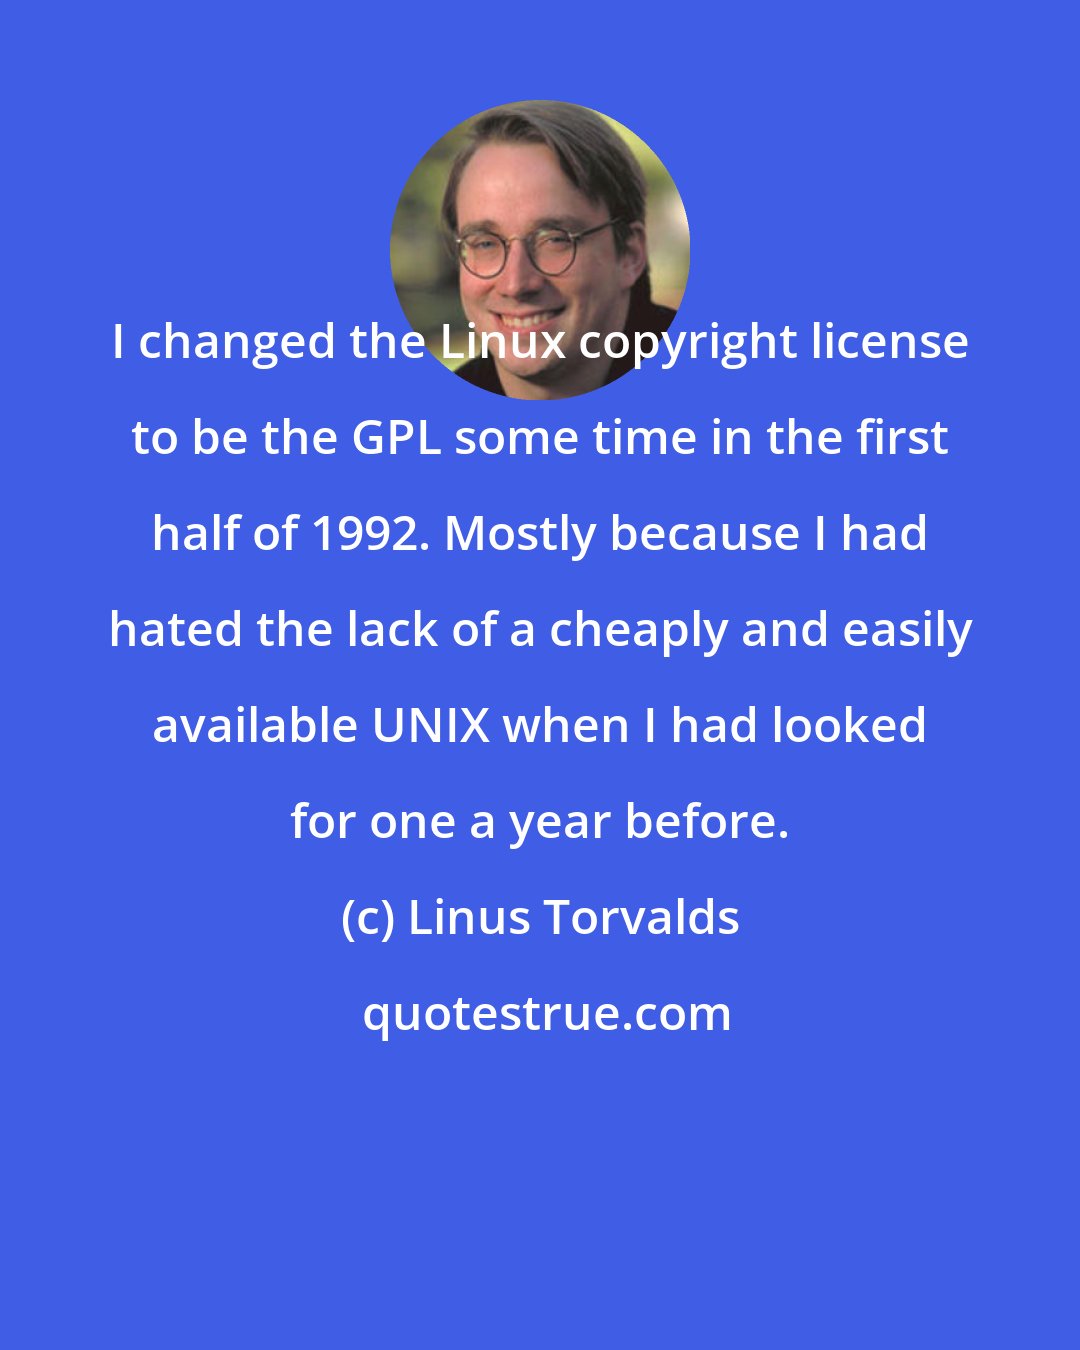 Linus Torvalds: I changed the Linux copyright license to be the GPL some time in the first half of 1992. Mostly because I had hated the lack of a cheaply and easily available UNIX when I had looked for one a year before.